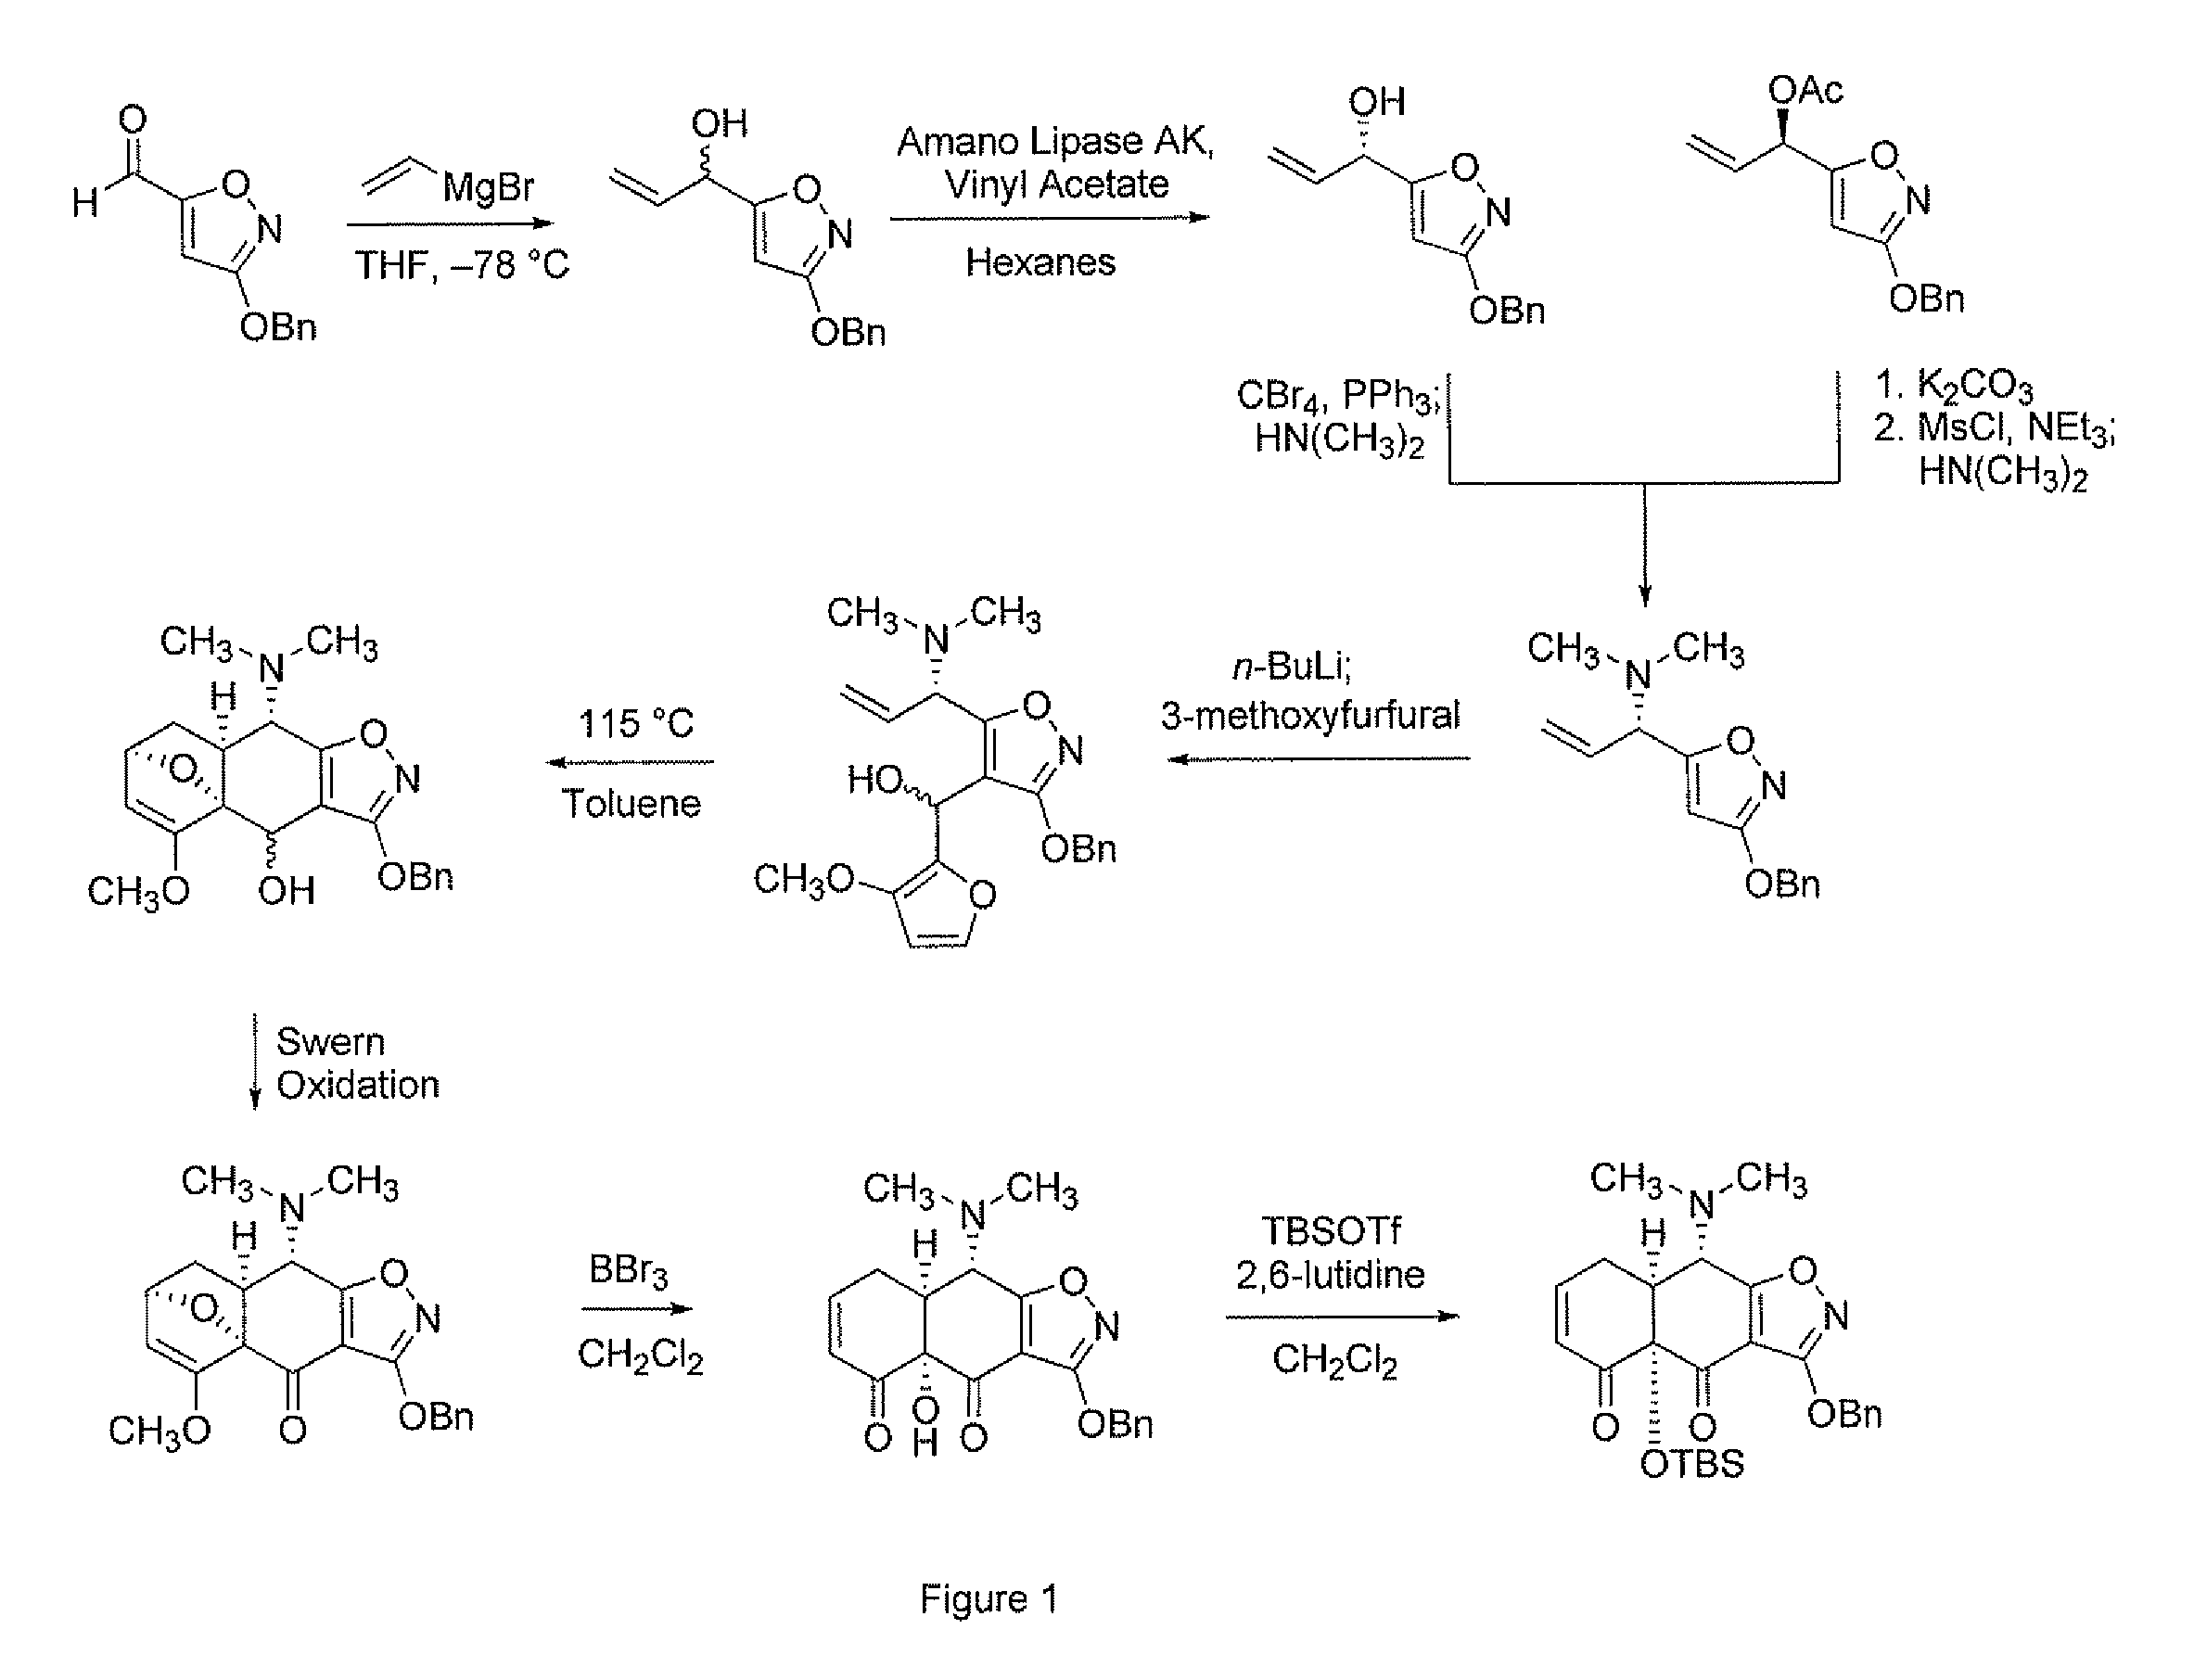 Synthesis of enone intermediate